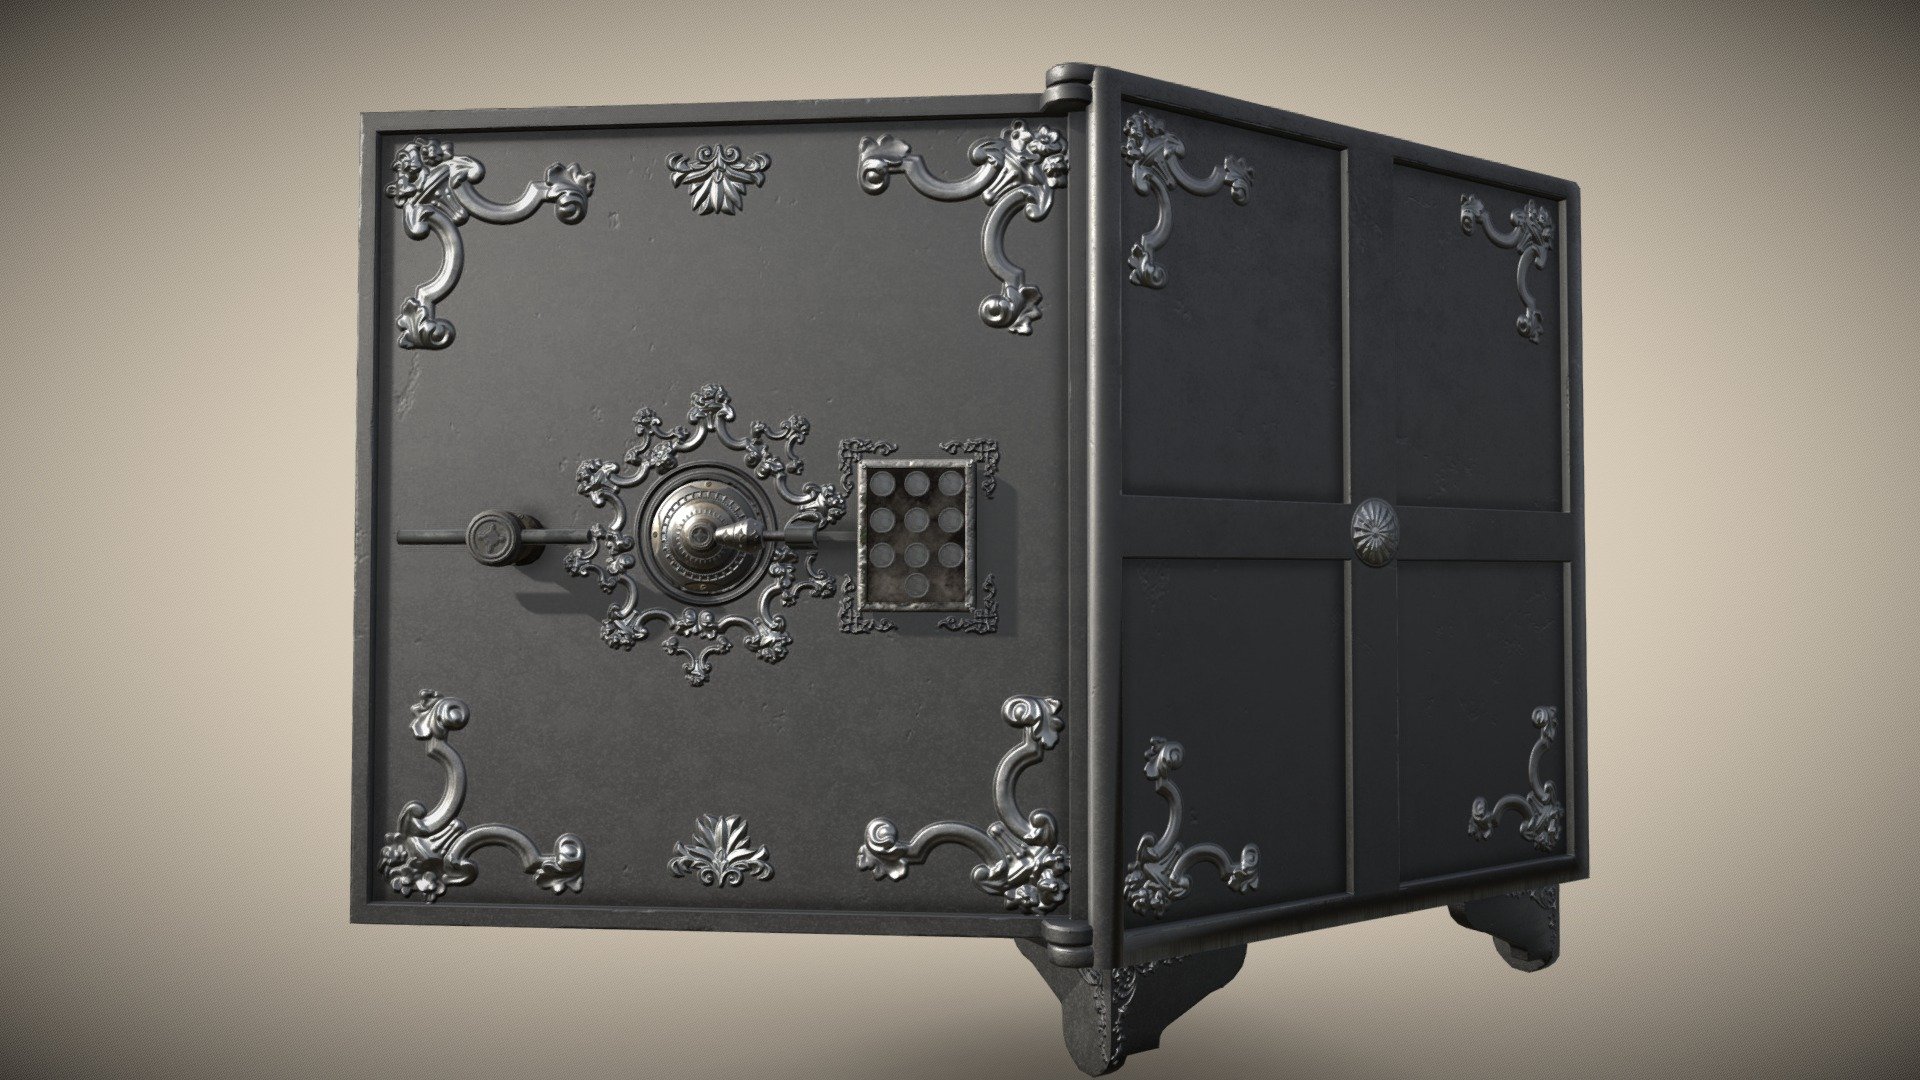 Vintage metal safe PBR low-poly game ready all models are separated Polygons 3499 Vertices 3718 - Vintage metal safe PBR game ready Low-poly 3D mo - Buy Royalty Free 3D model by Svetlana07 3d model